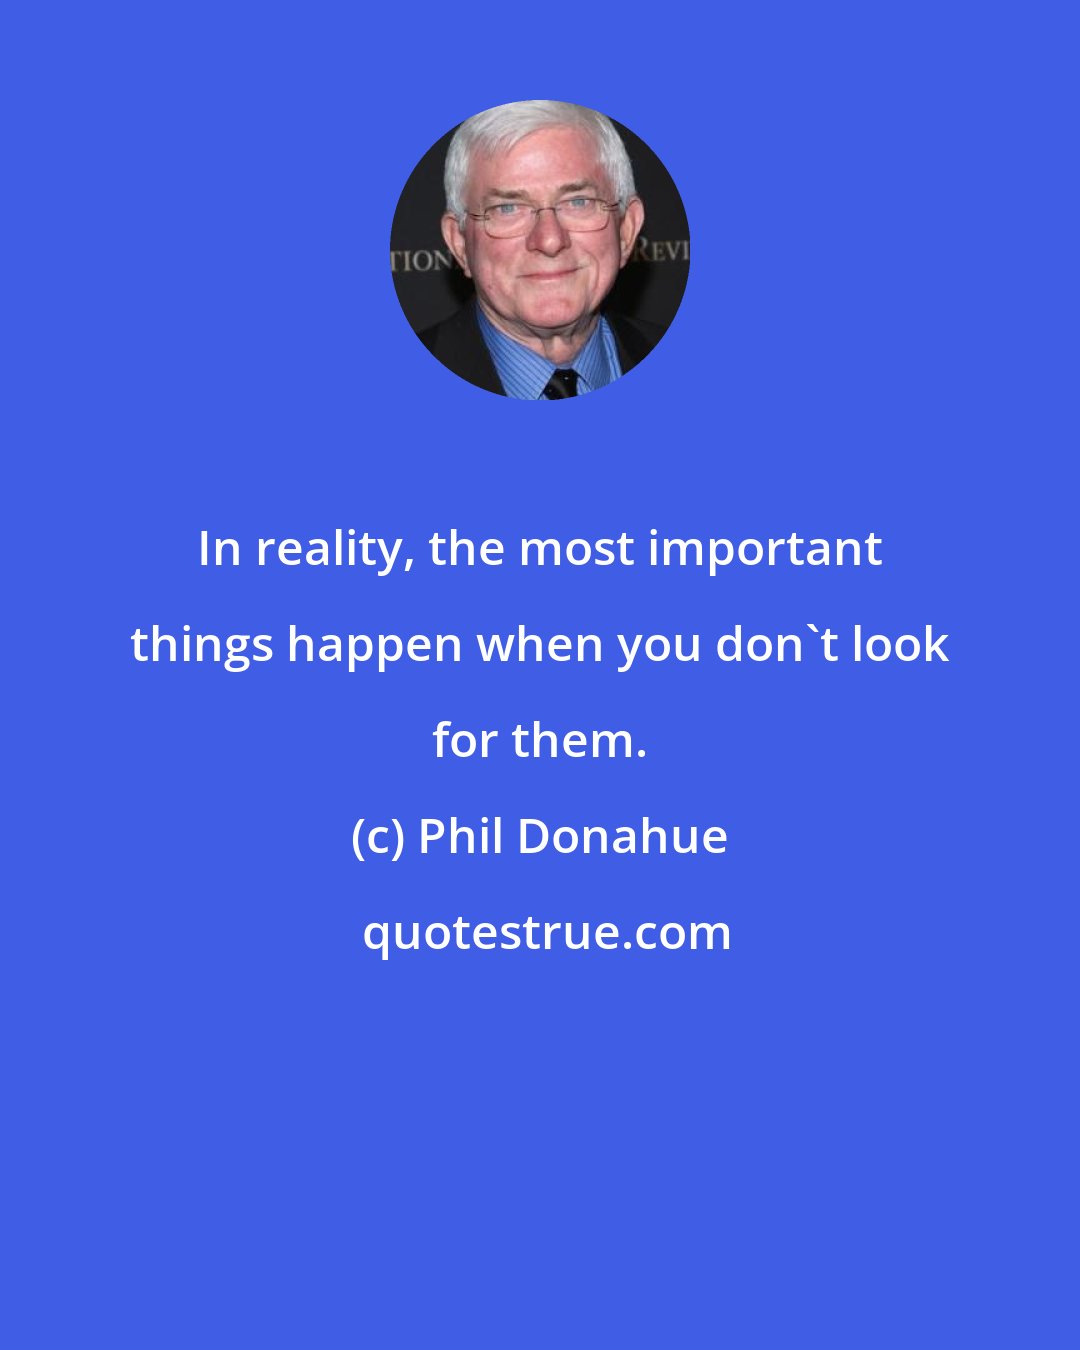 Phil Donahue: In reality, the most important things happen when you don't look for them.